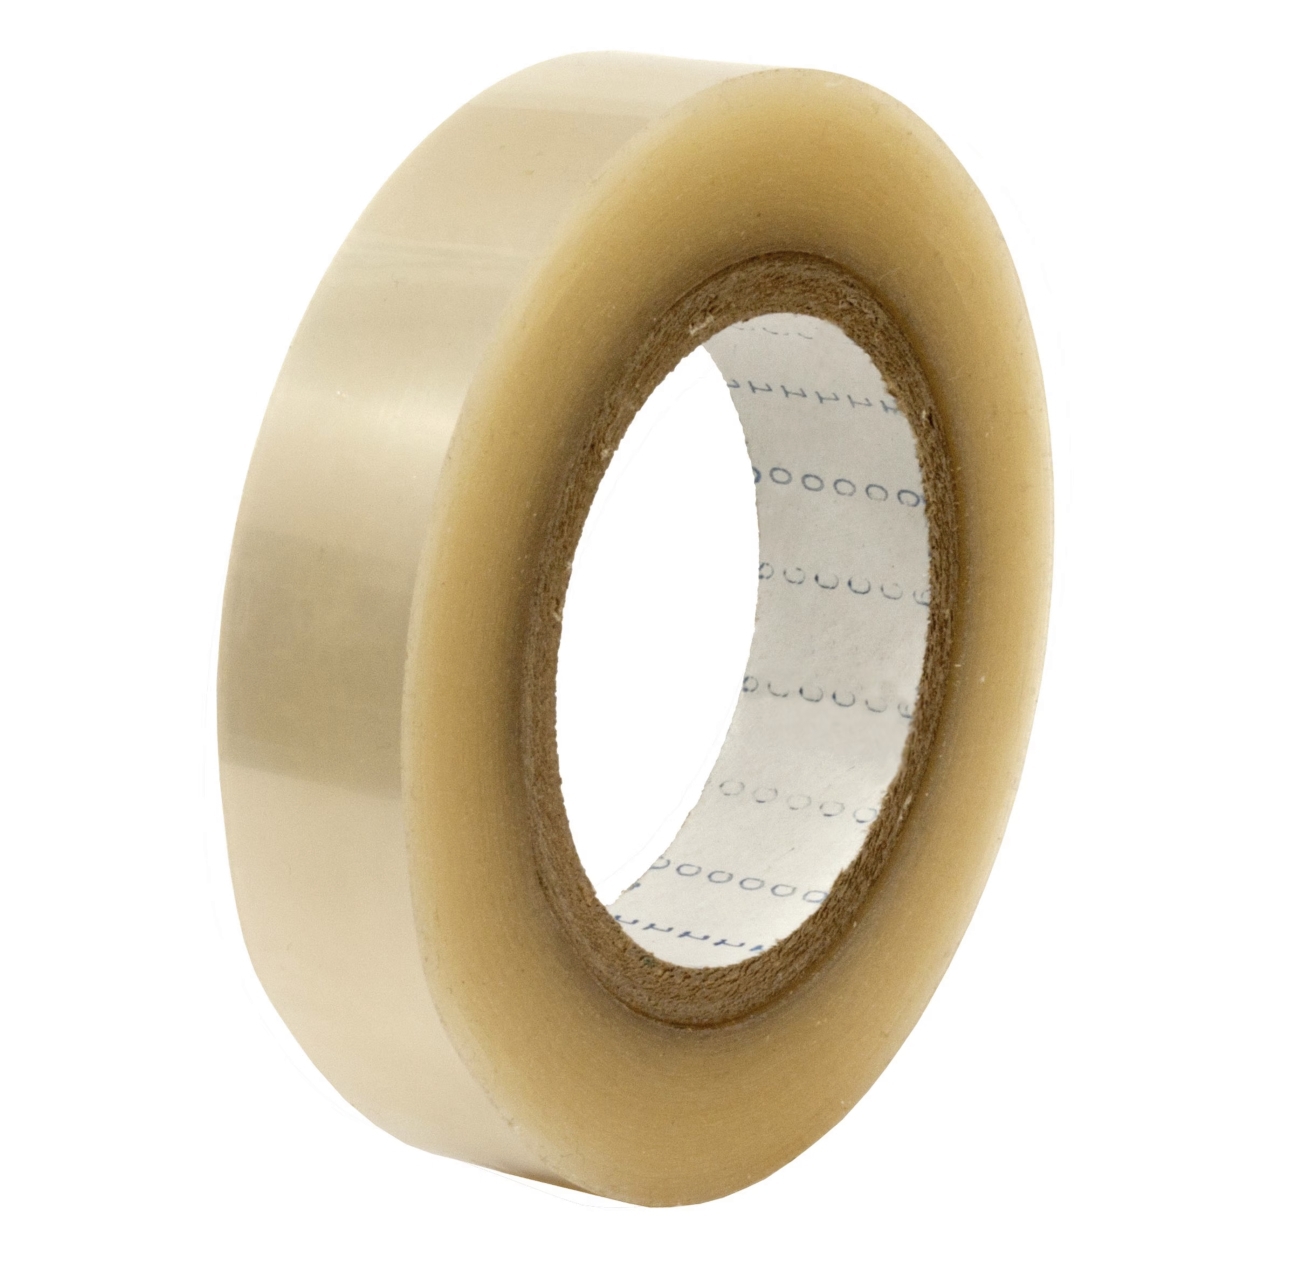 S-K-S dubbelzijdige kleefband met polyester drager 960, transparant, 38 mm x 66 m, siliconen kleefband, 0,085 mm